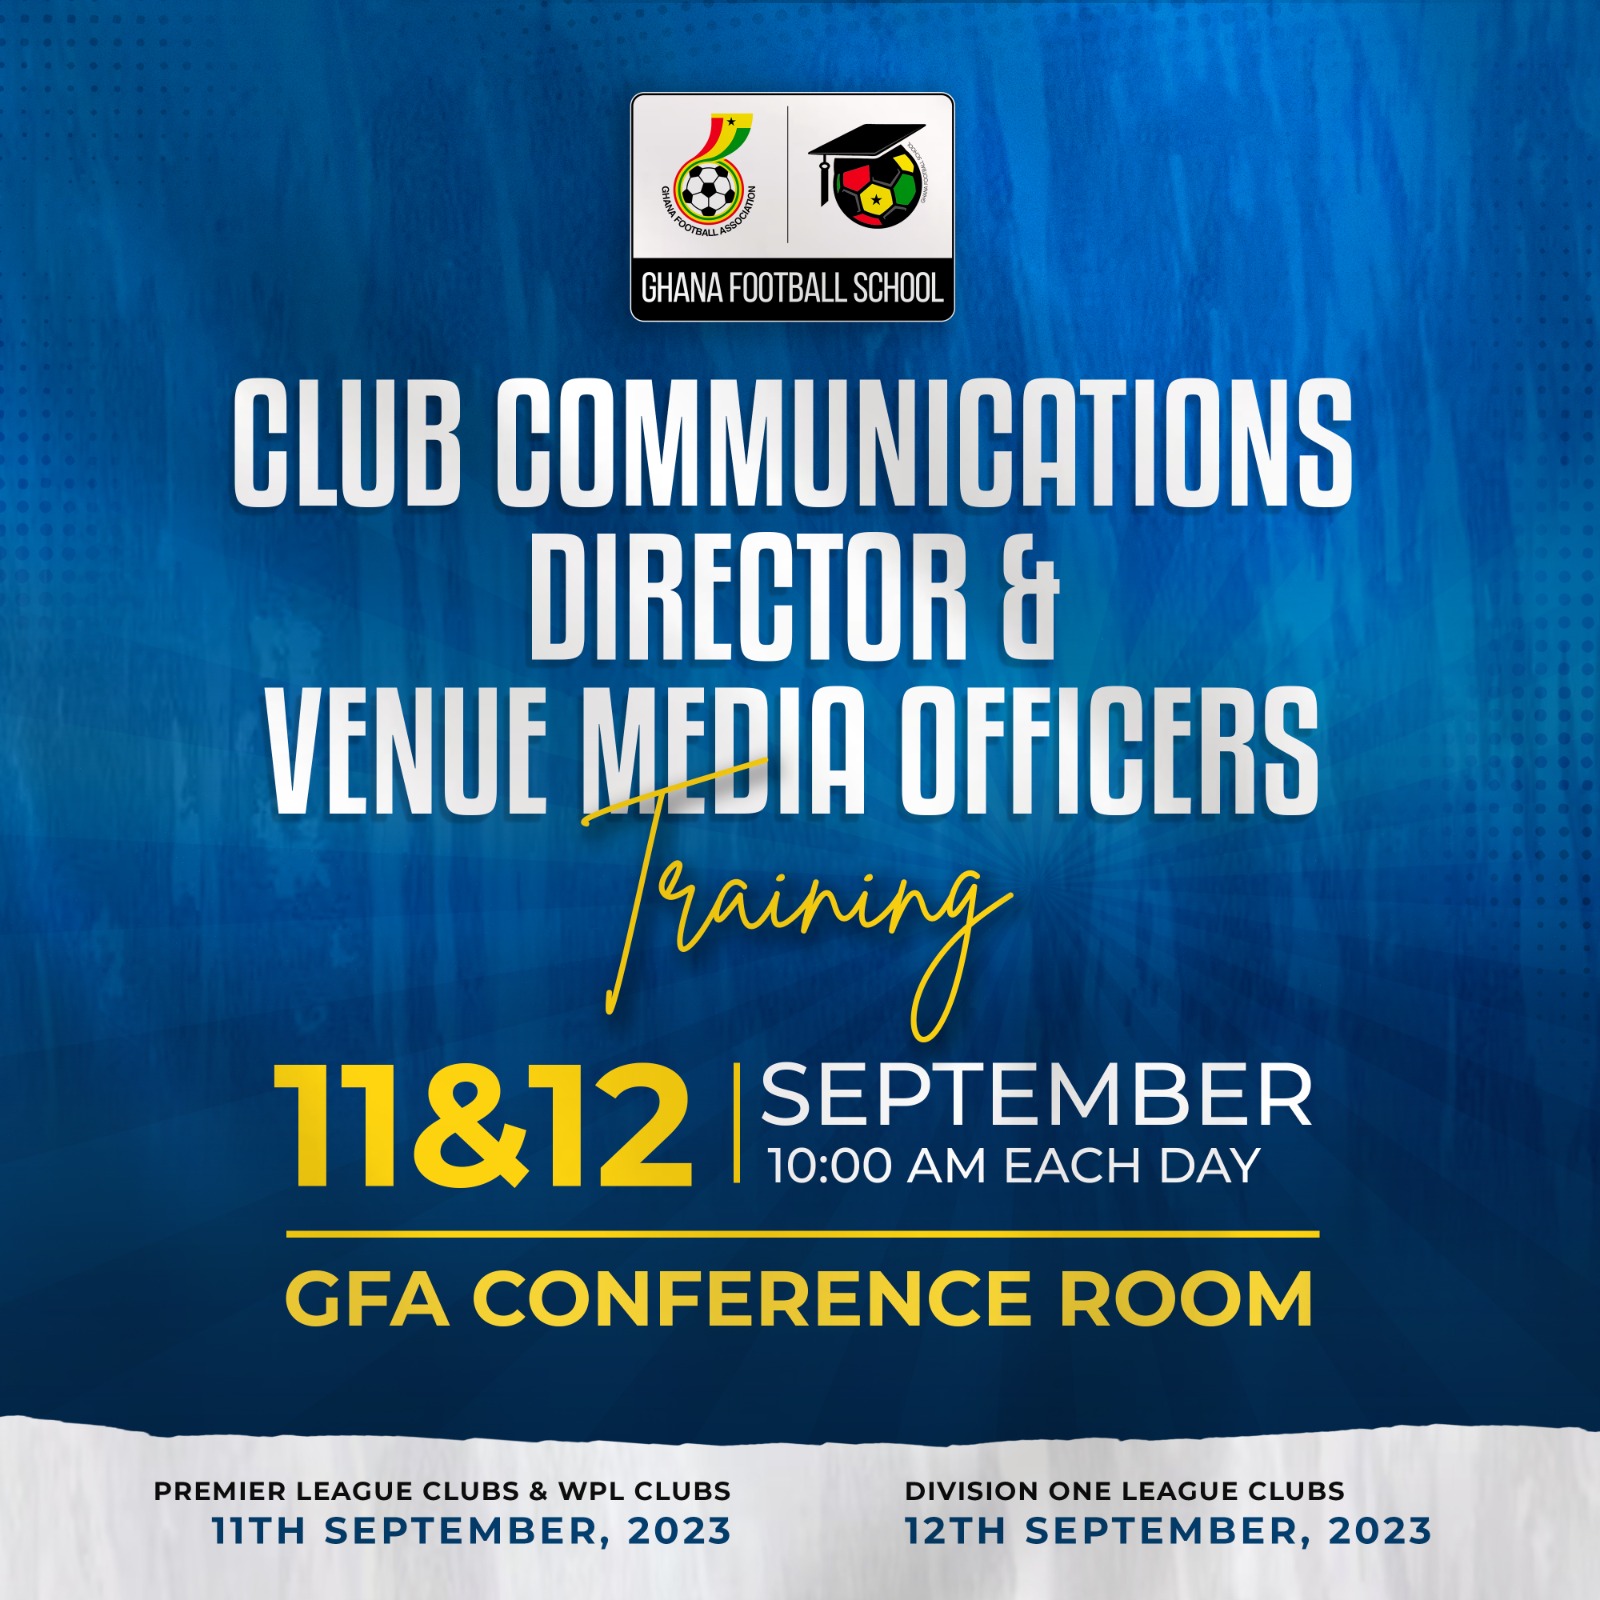 Club Communications Directors & Venue Media Officers to attend training workshop